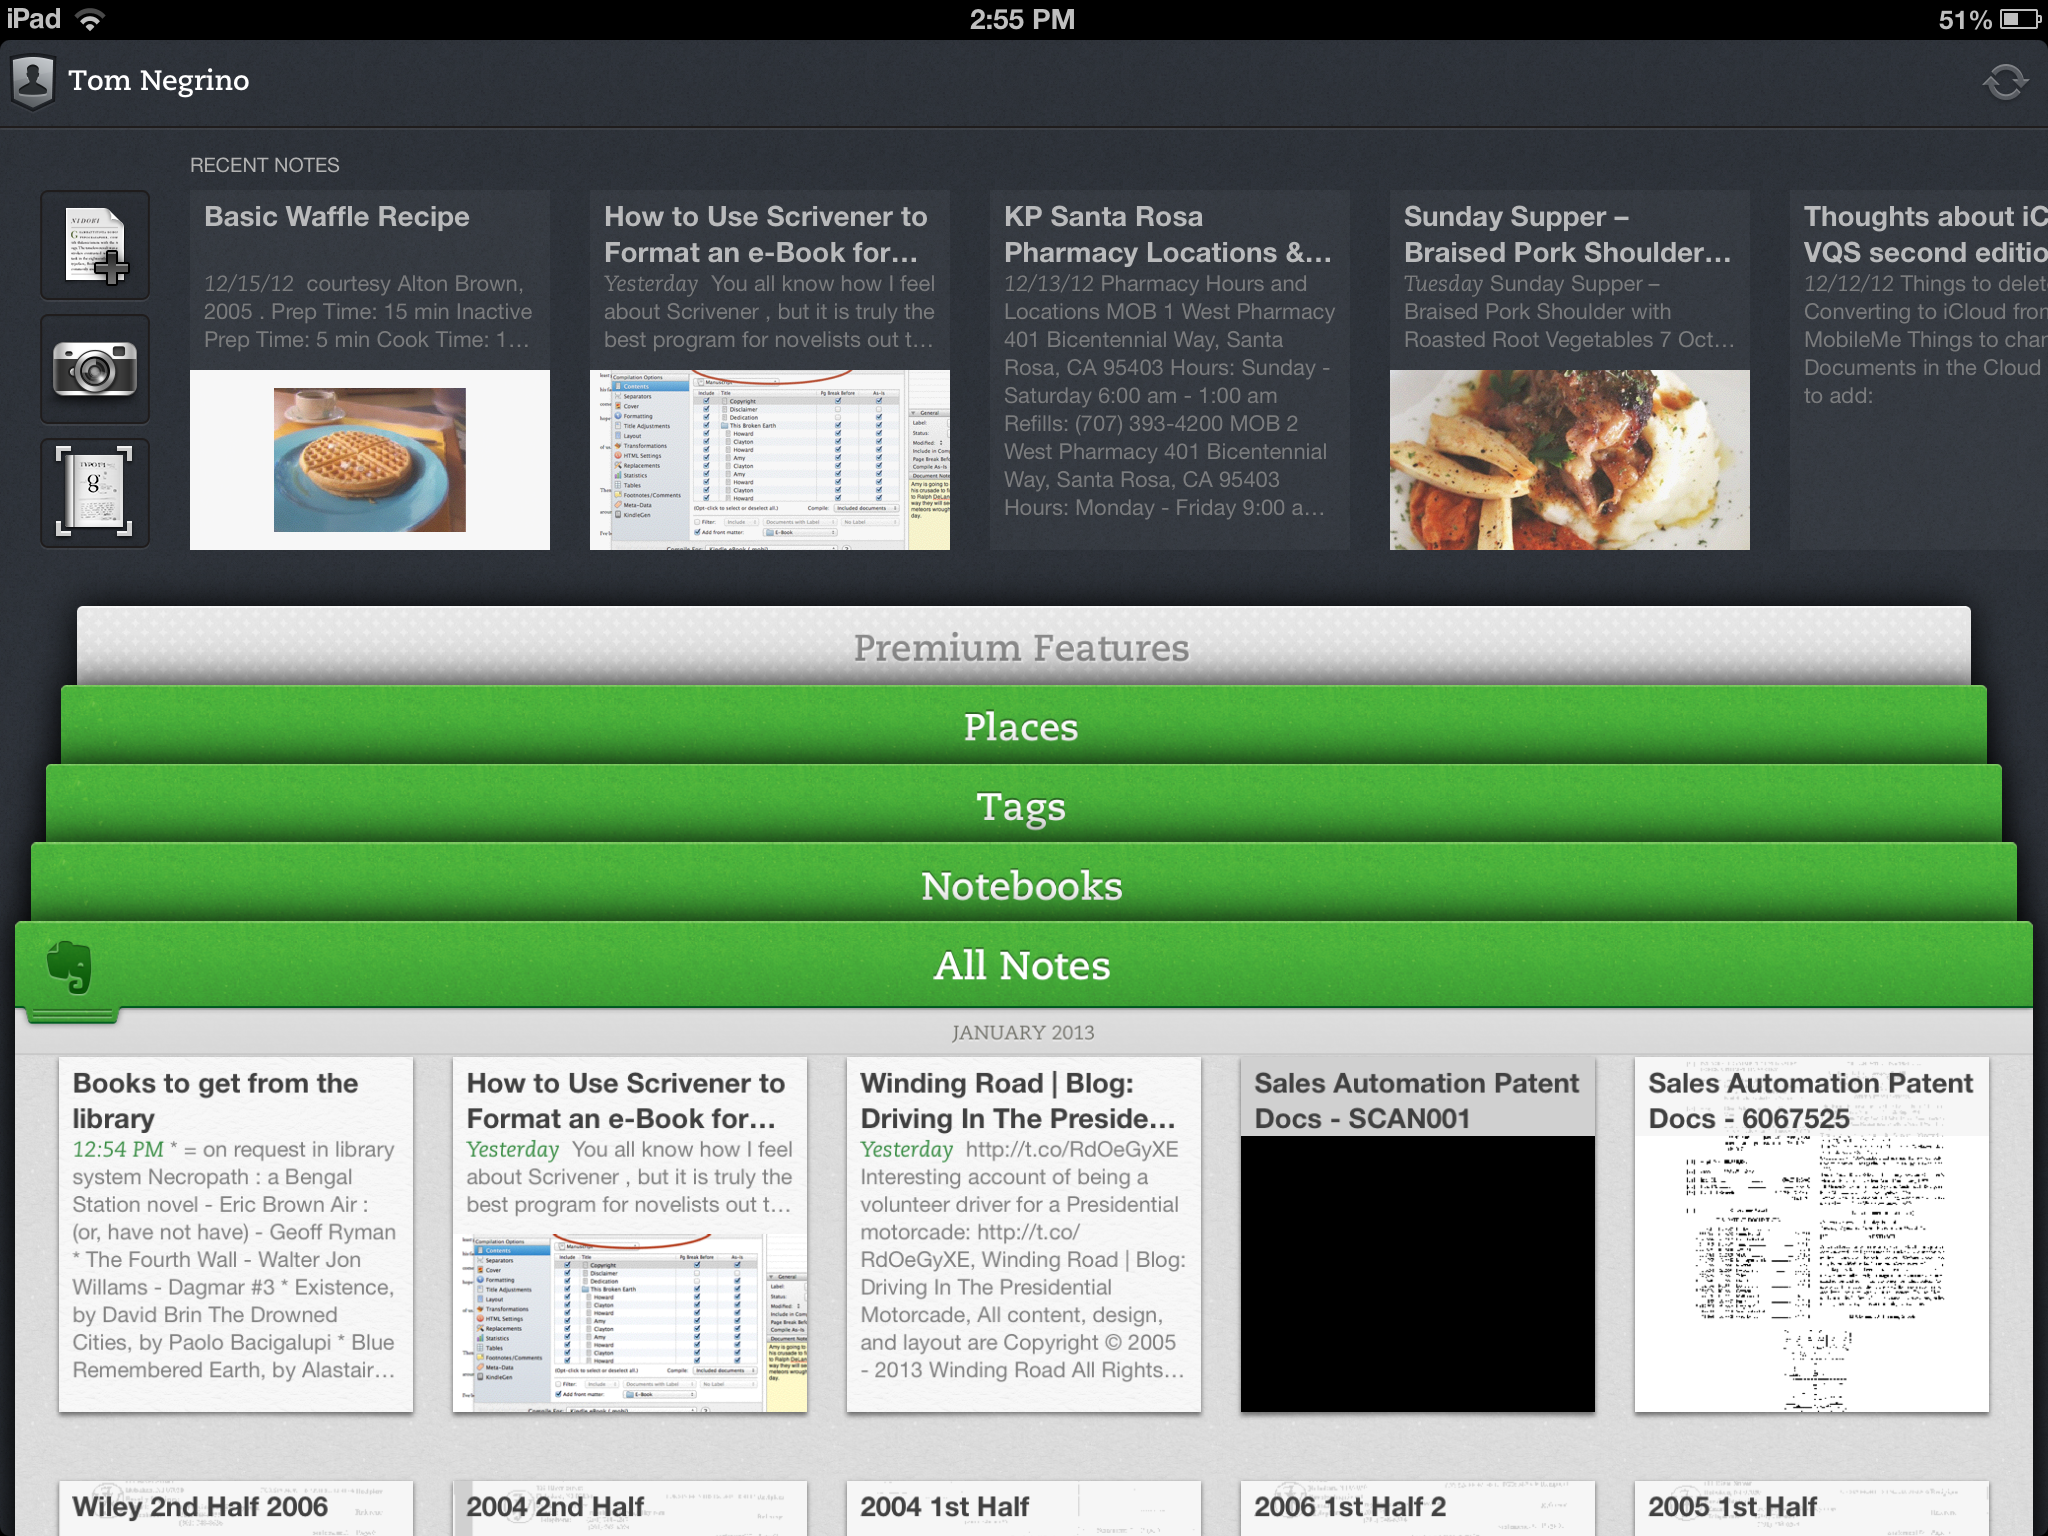 download the last version for ios EverNote 10.64.4